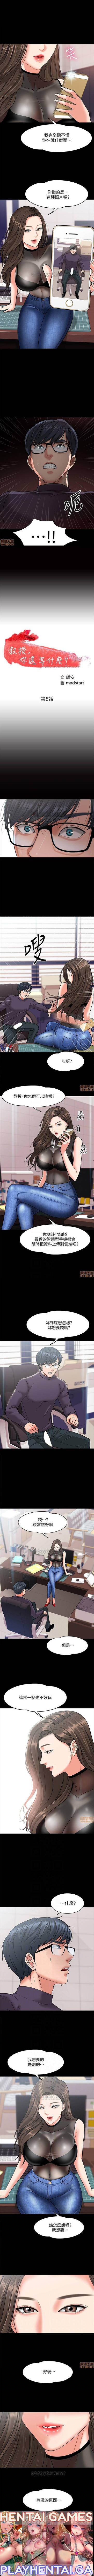 Gay Gangbang PROFESSOR, ARE YOU JUST GOING TO LOOK AT ME? | DESIRE SWAMP | 教授，你還等什麼? Ch. 5 [Chinese] Manhwa Best - Picture 2